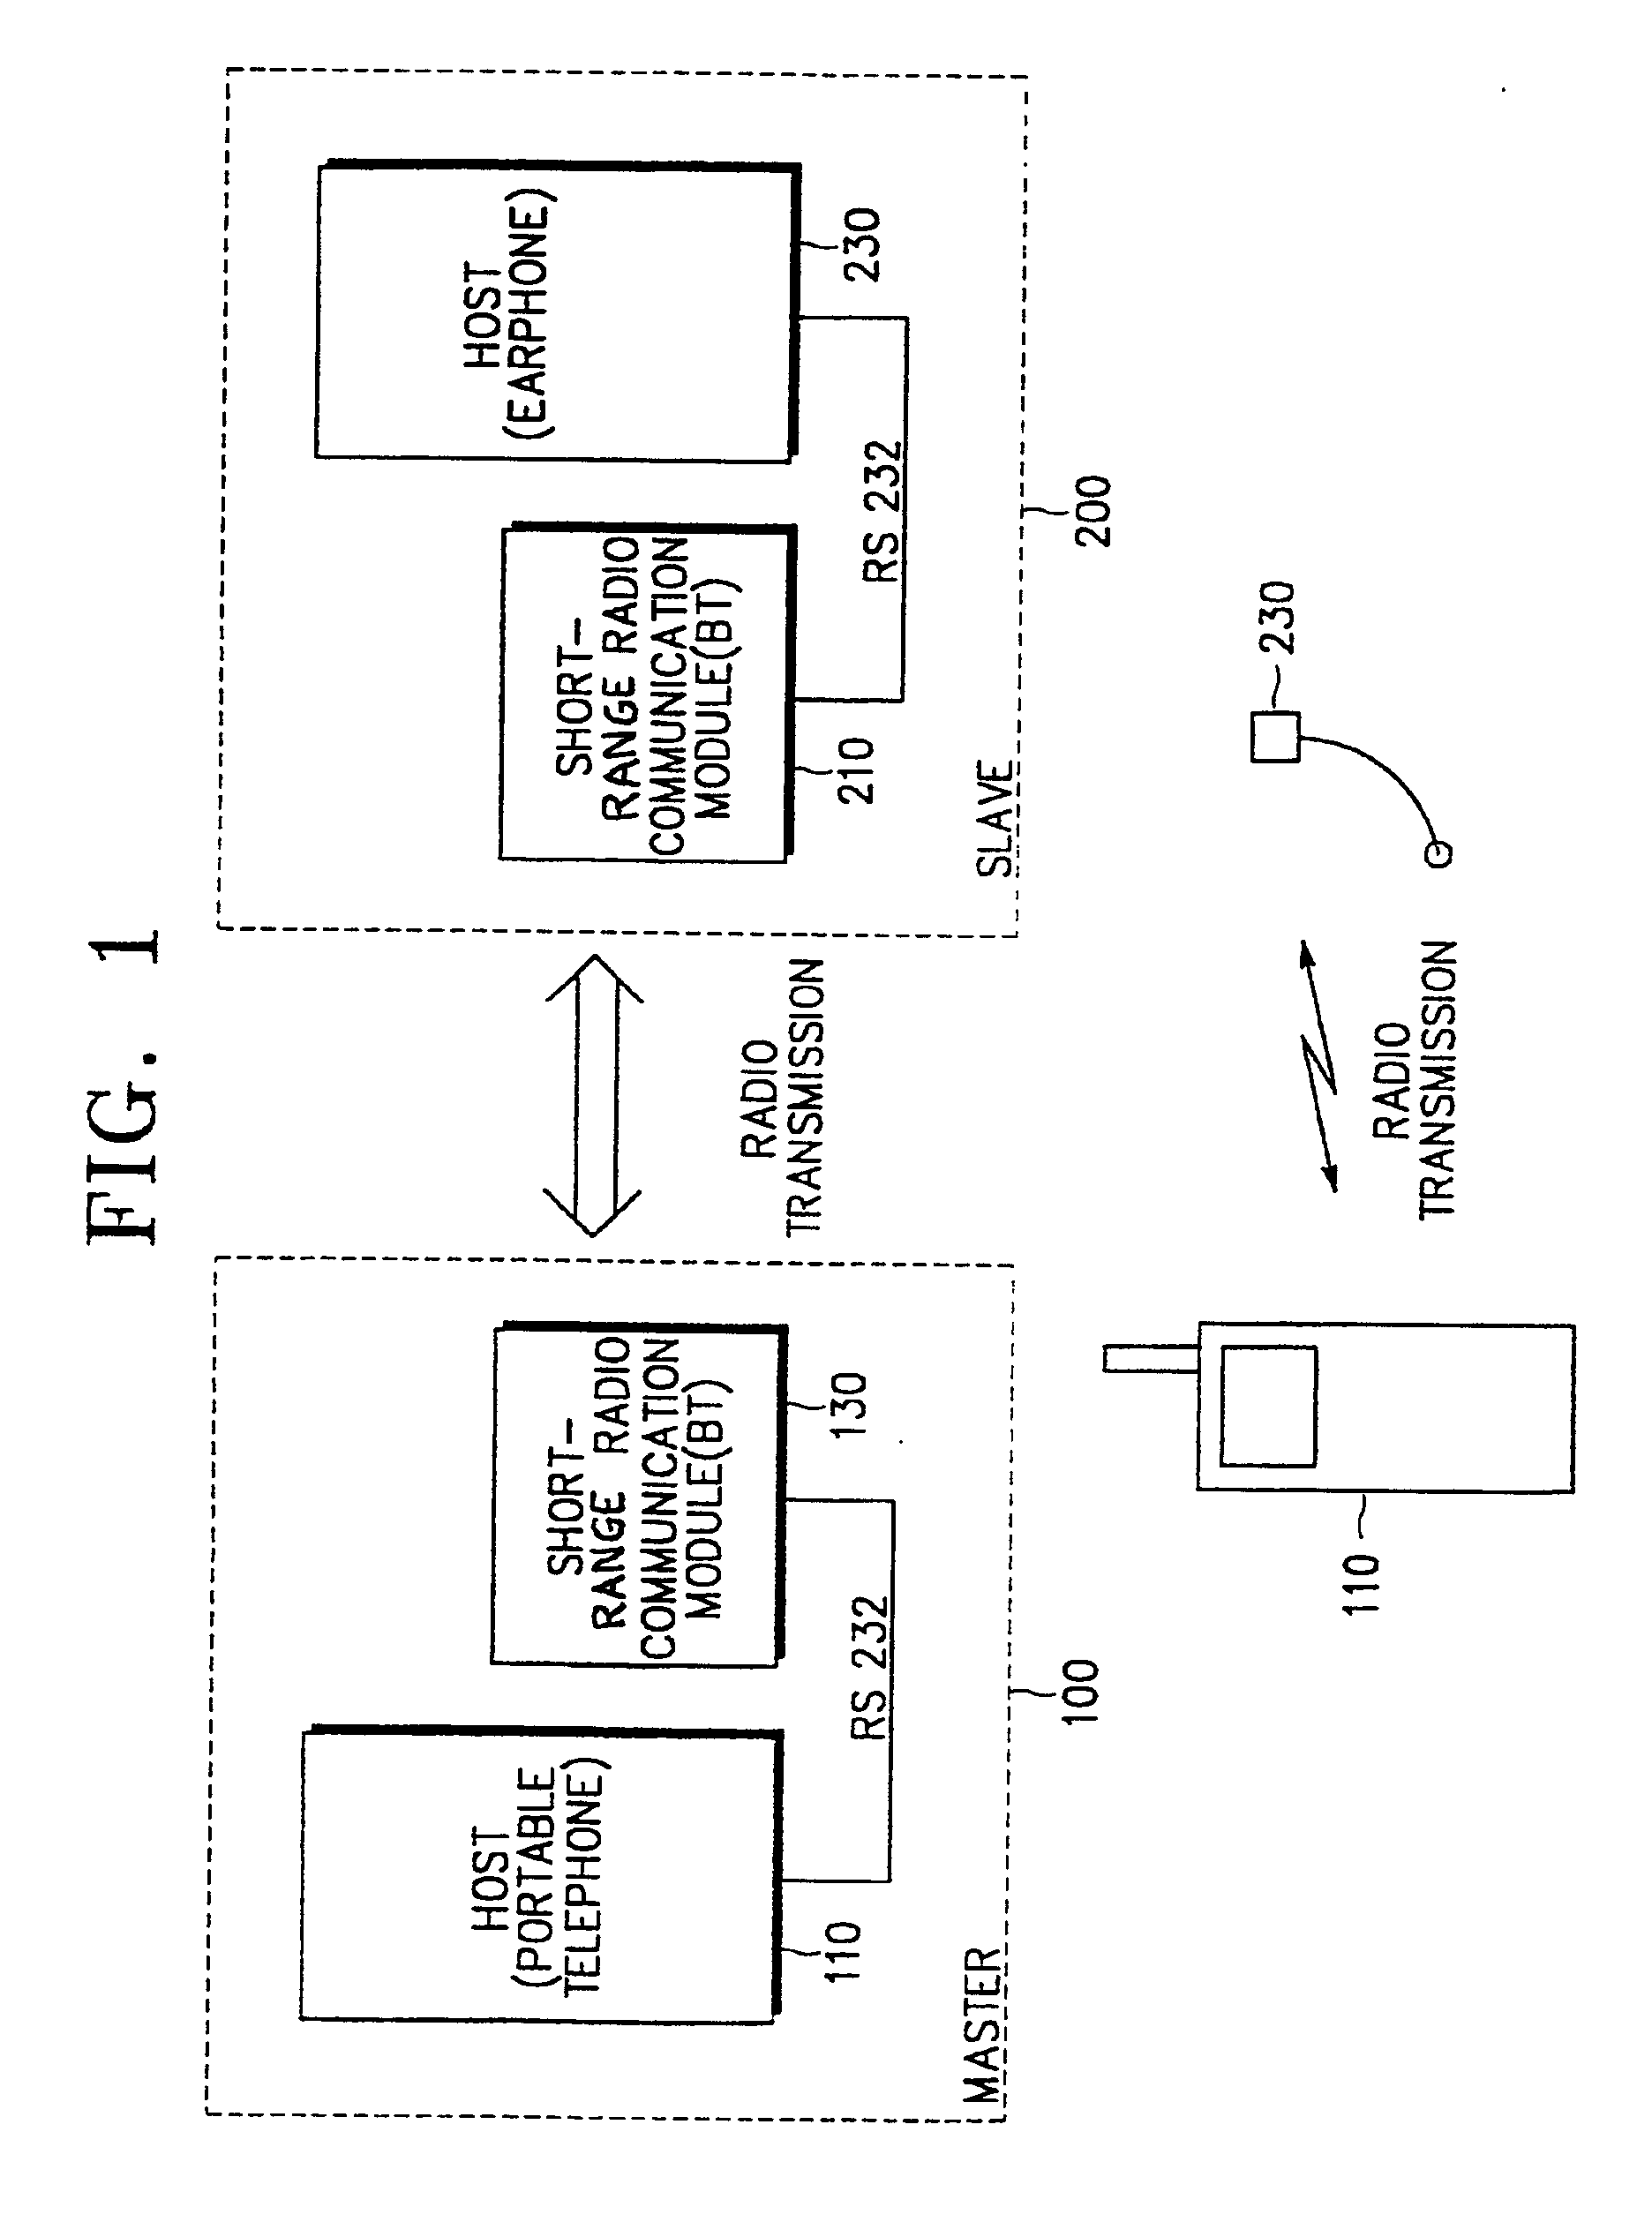 Apparatus for preventing loss of portable telephone using a bluetooth communication protocol and control method thereof